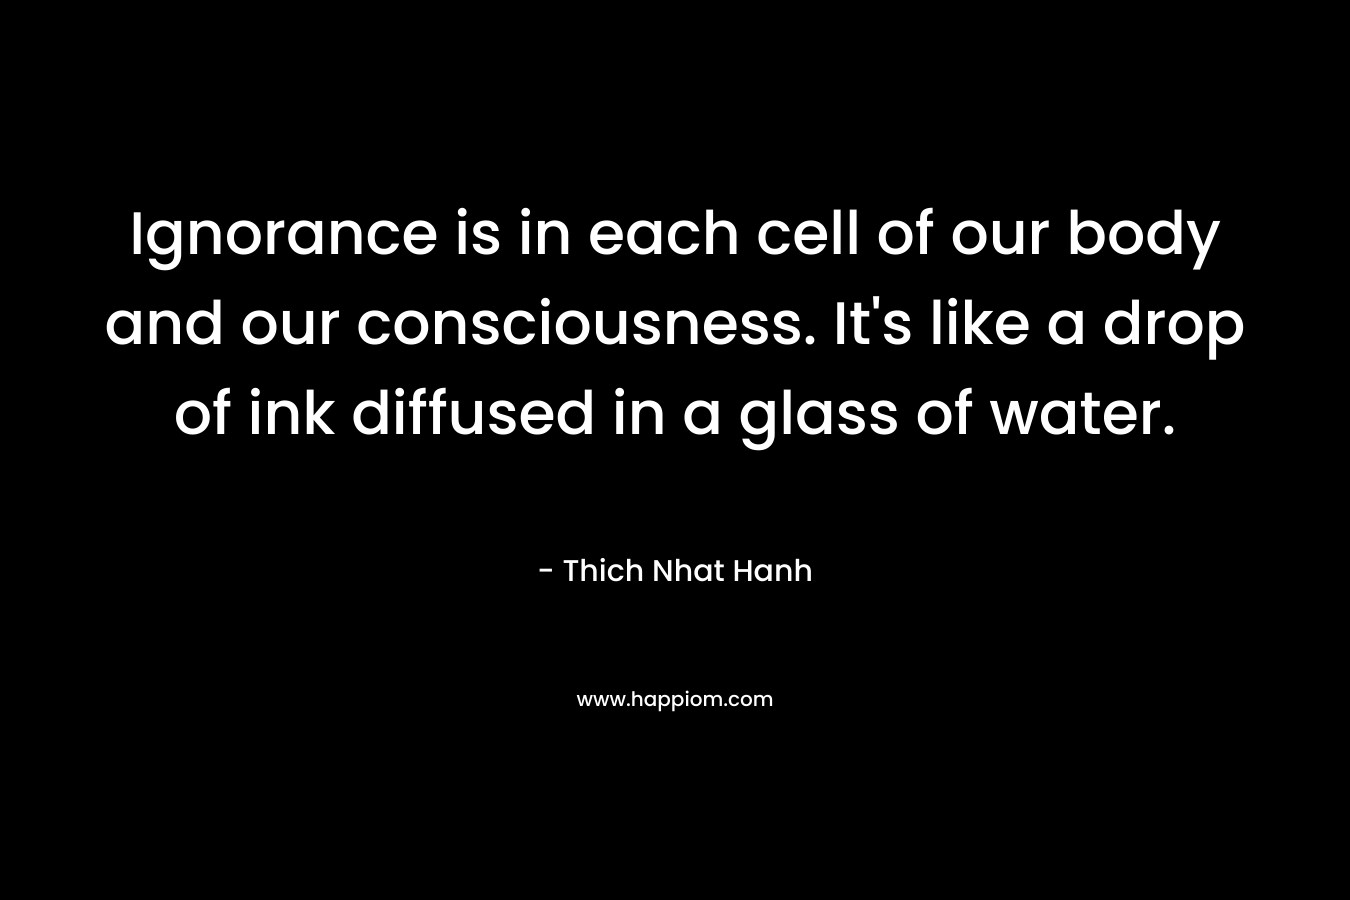 Ignorance is in each cell of our body and our consciousness. It’s like a drop of ink diffused in a glass of water. – Thich Nhat Hanh